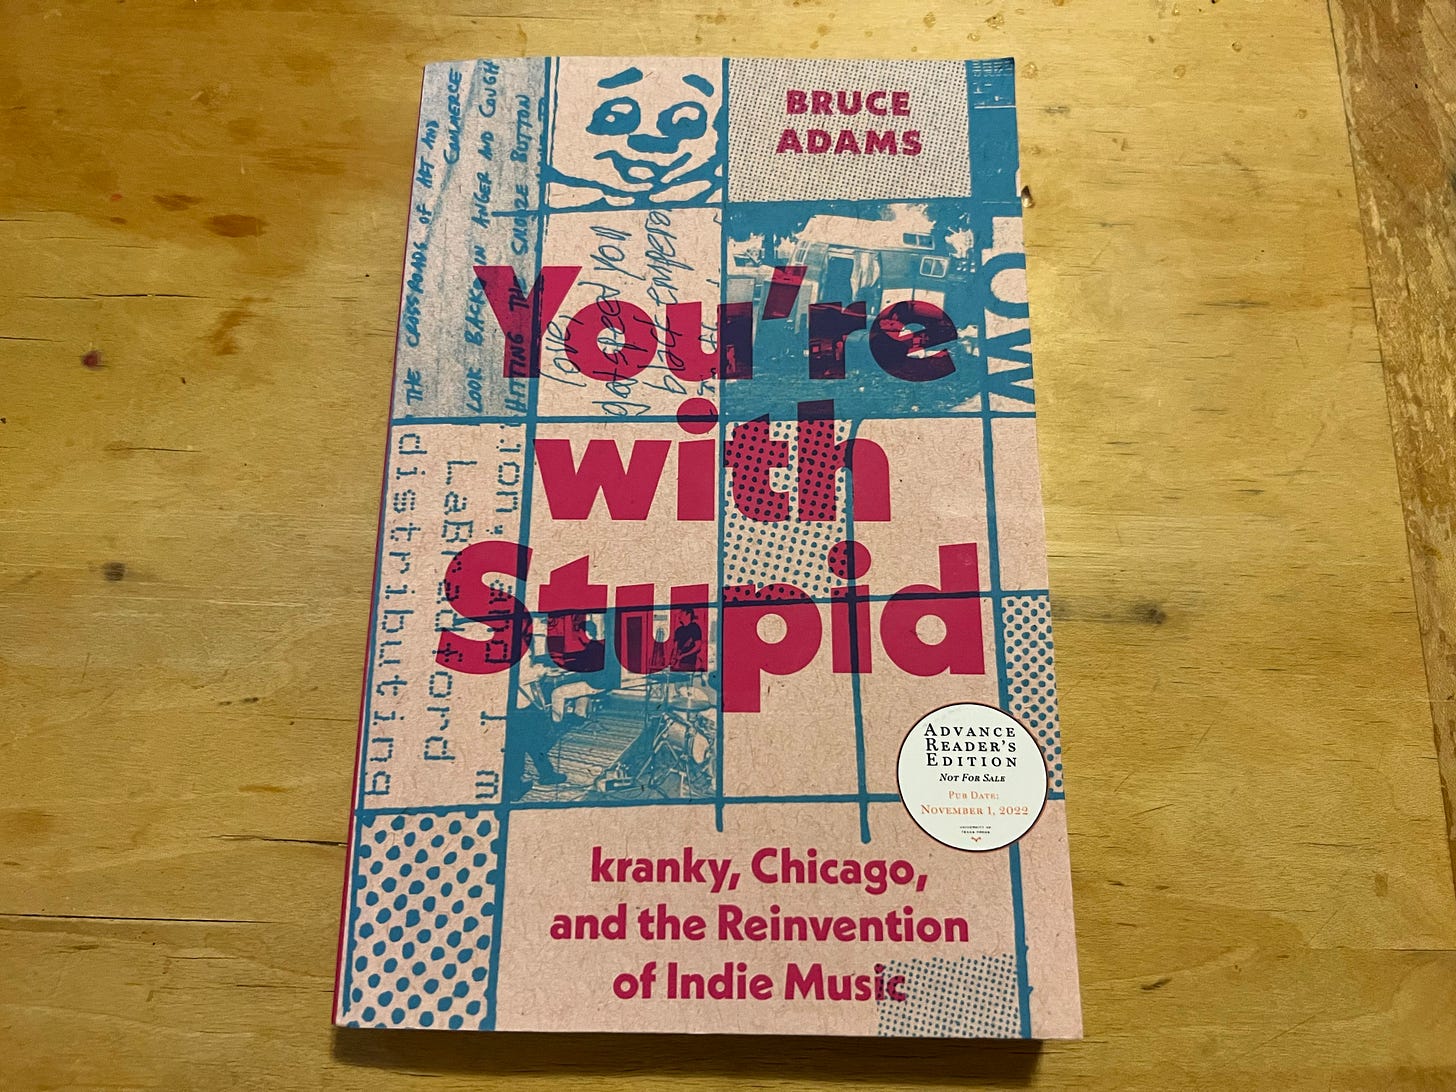 An advance reader's edition of a book called You're With Stupid by Bruce Adams